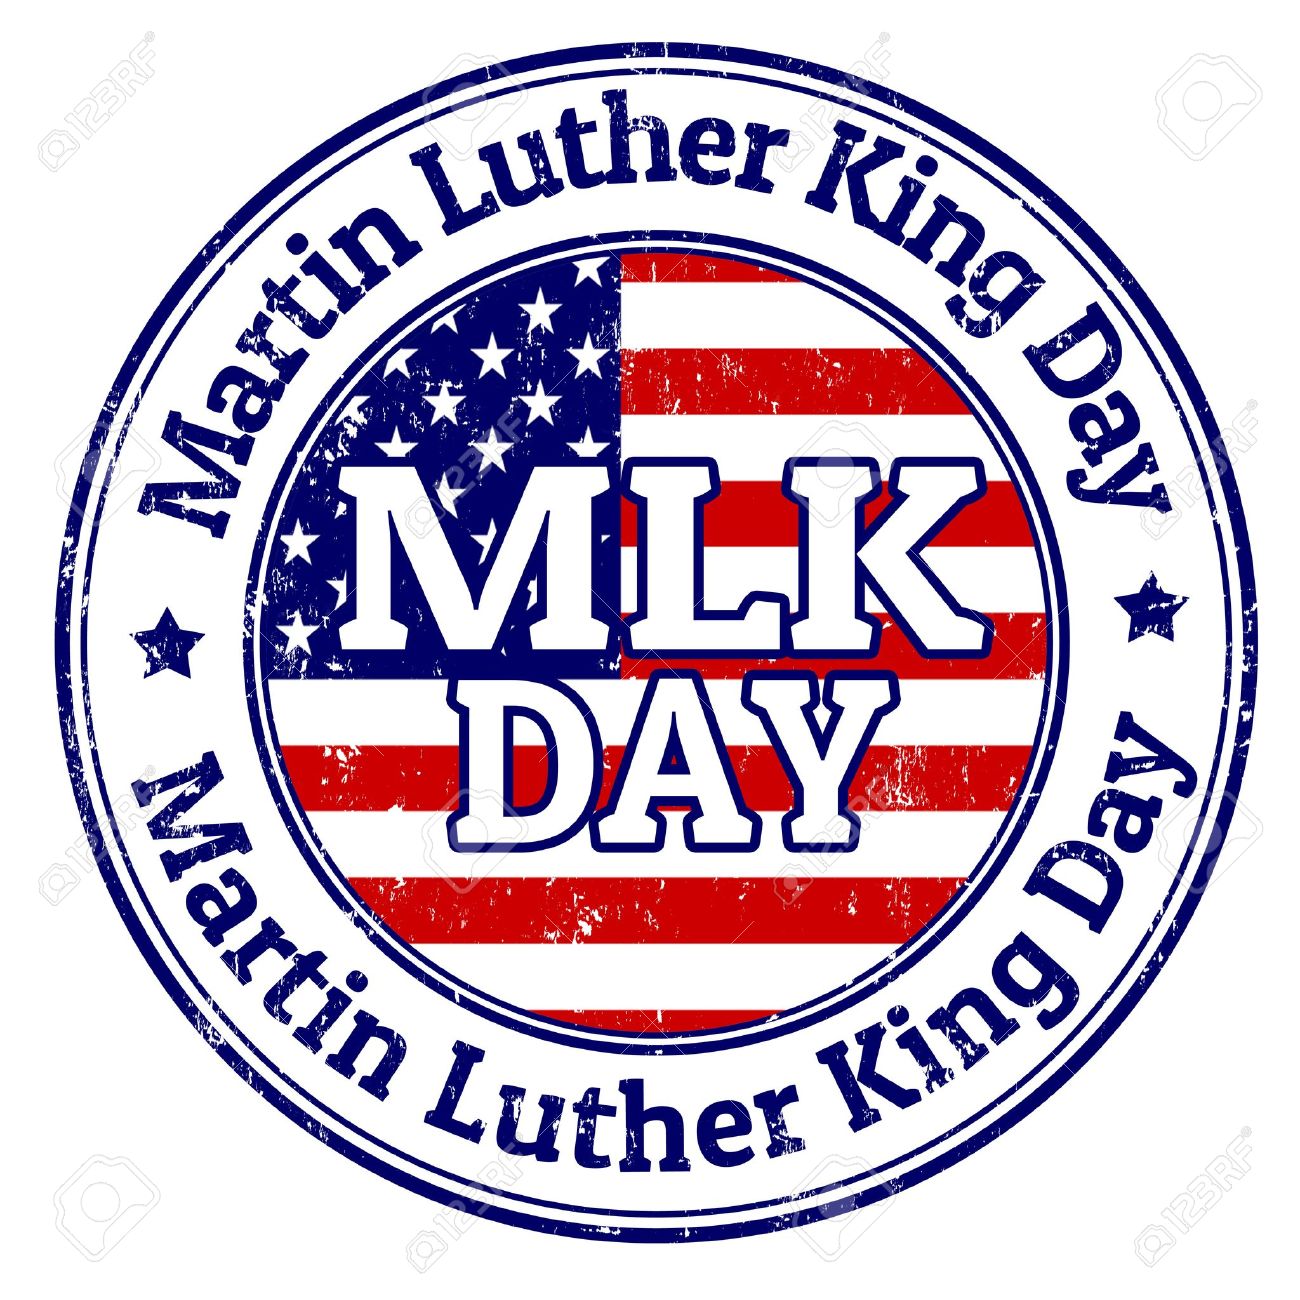 Martin luther king day clipart 6 » Clipart Station.